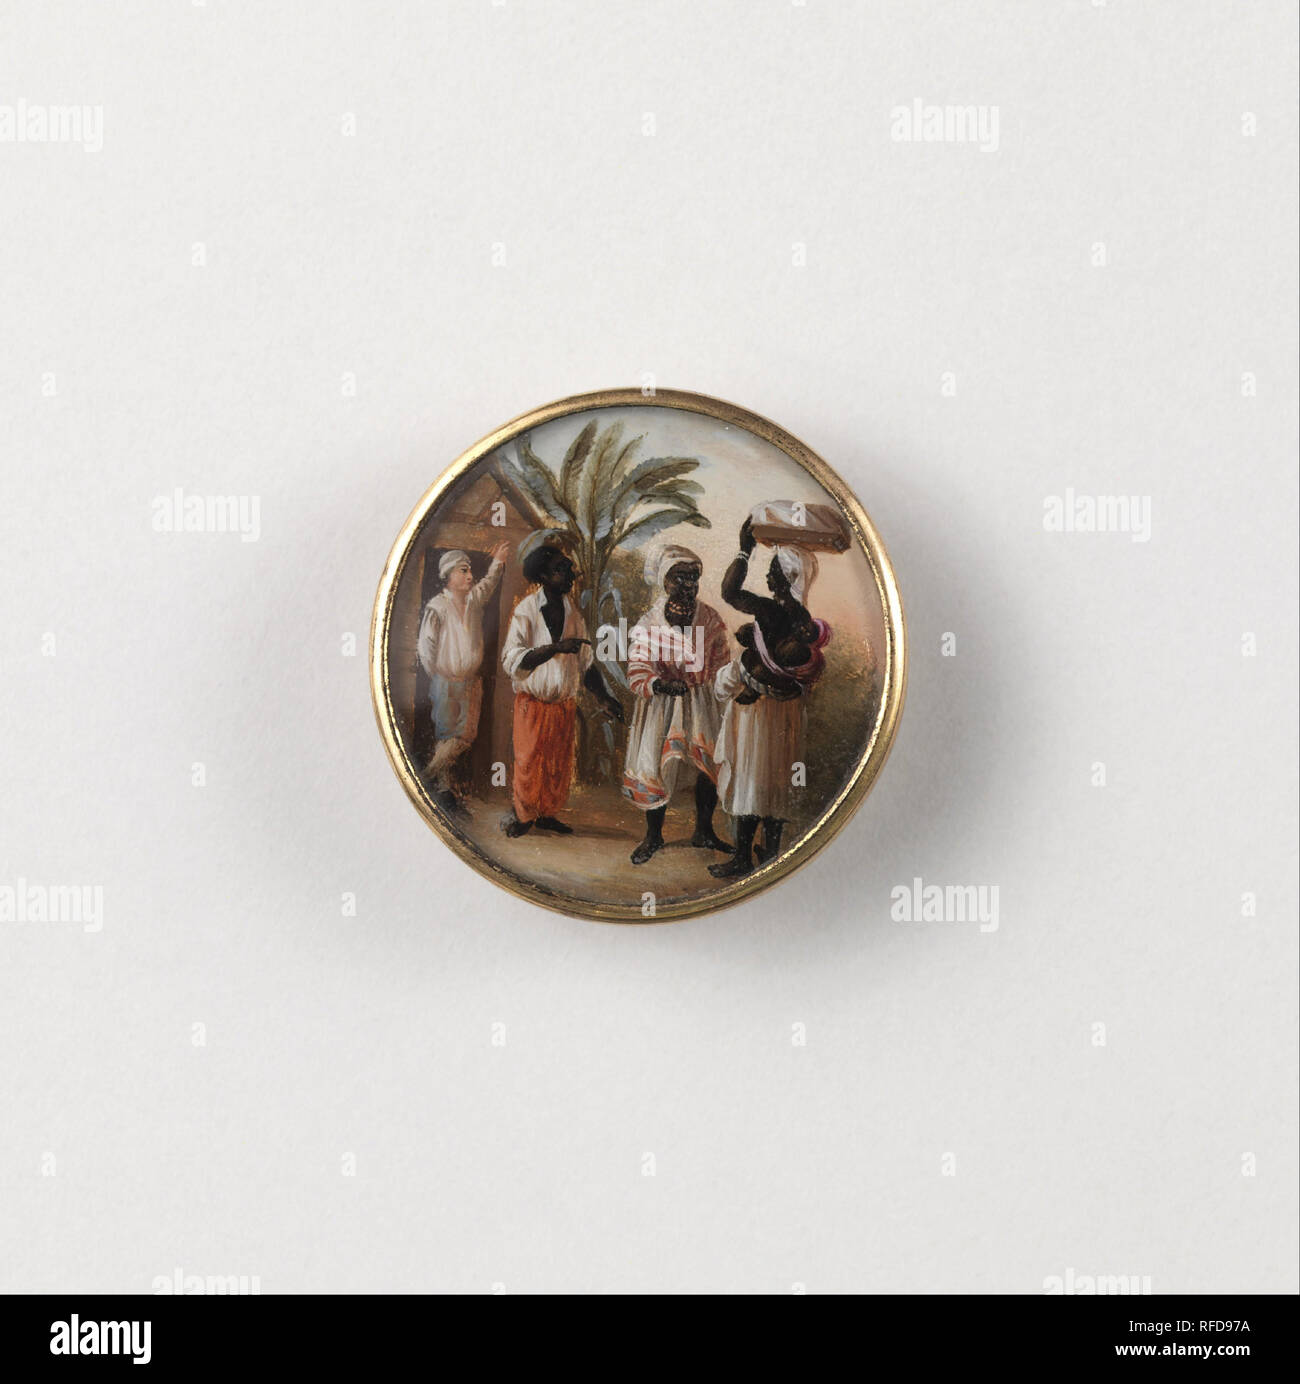 Button. Date/Period: Late 18th century. Button. Gouache paint on tin verre fixé, ivory (backing), glass, gilded metal. Author: AGOSTINO BRUNIAS. Stock Photo